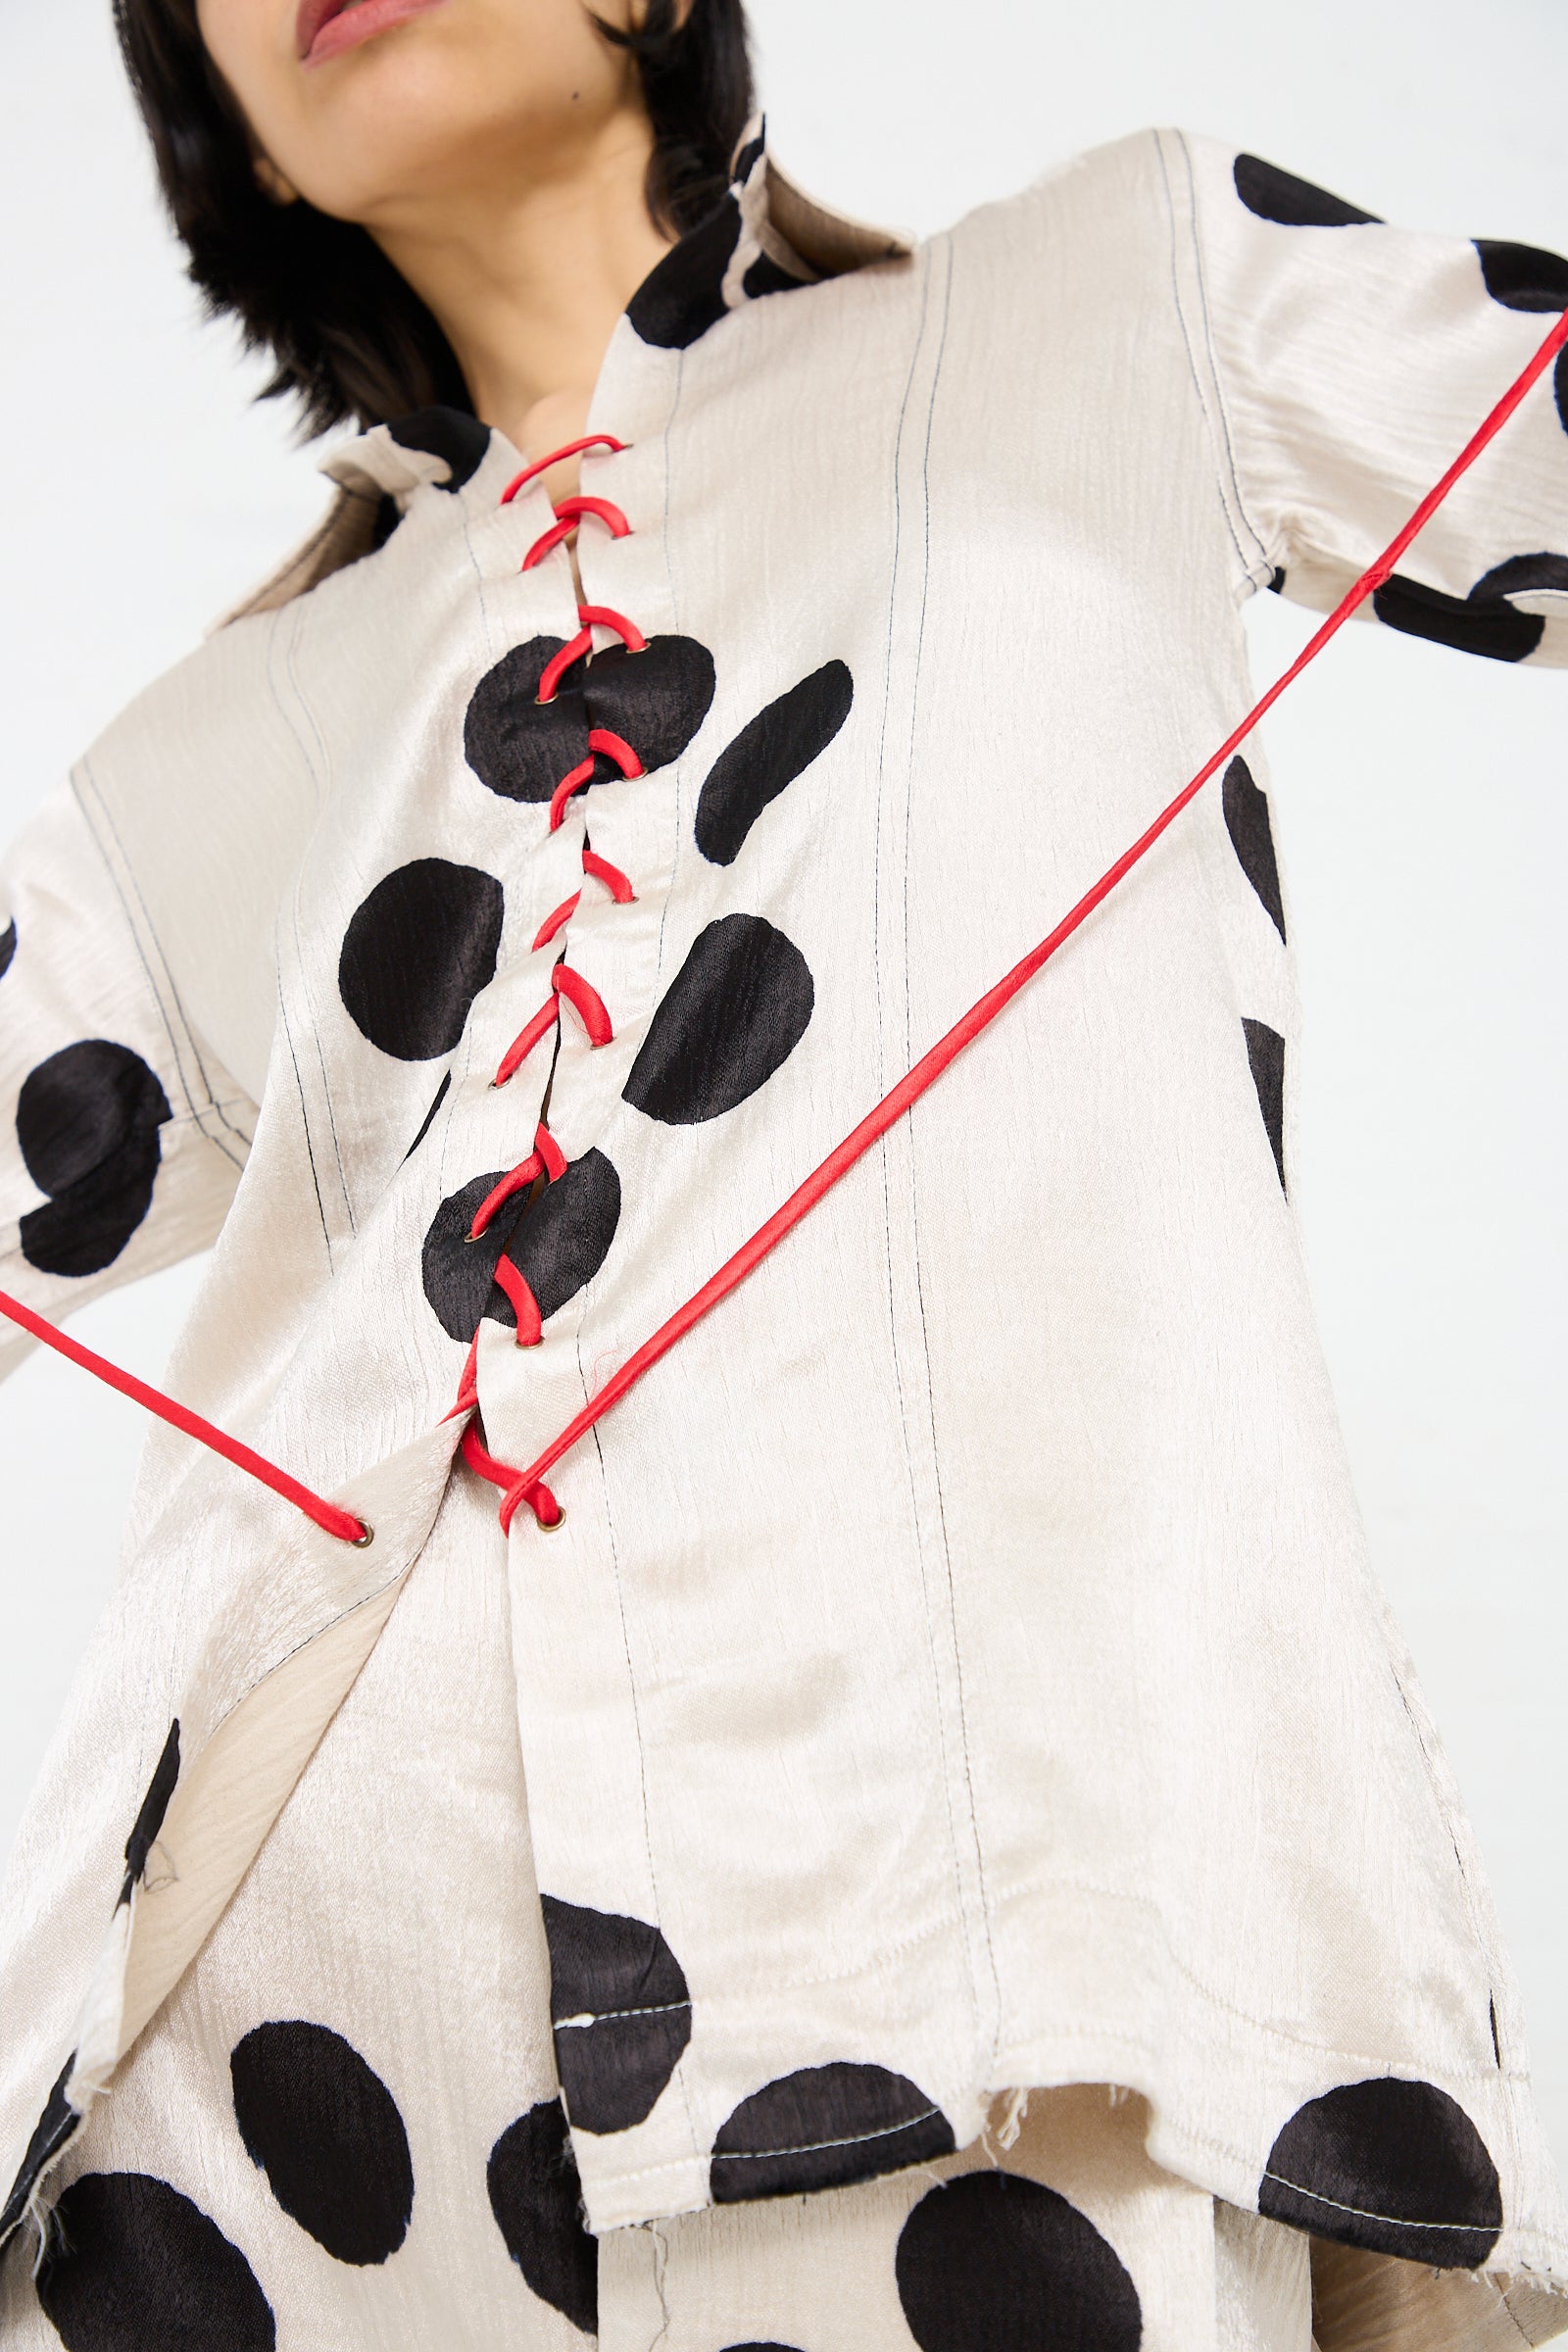 Person wearing a light-colored, long sleeve Silk Mashroo Lace Up Shirt in White by TIGRA TIGRA with large black polka dots and a red lace-up detail down the front. The person’s face is partially visible, and the background is plain white.